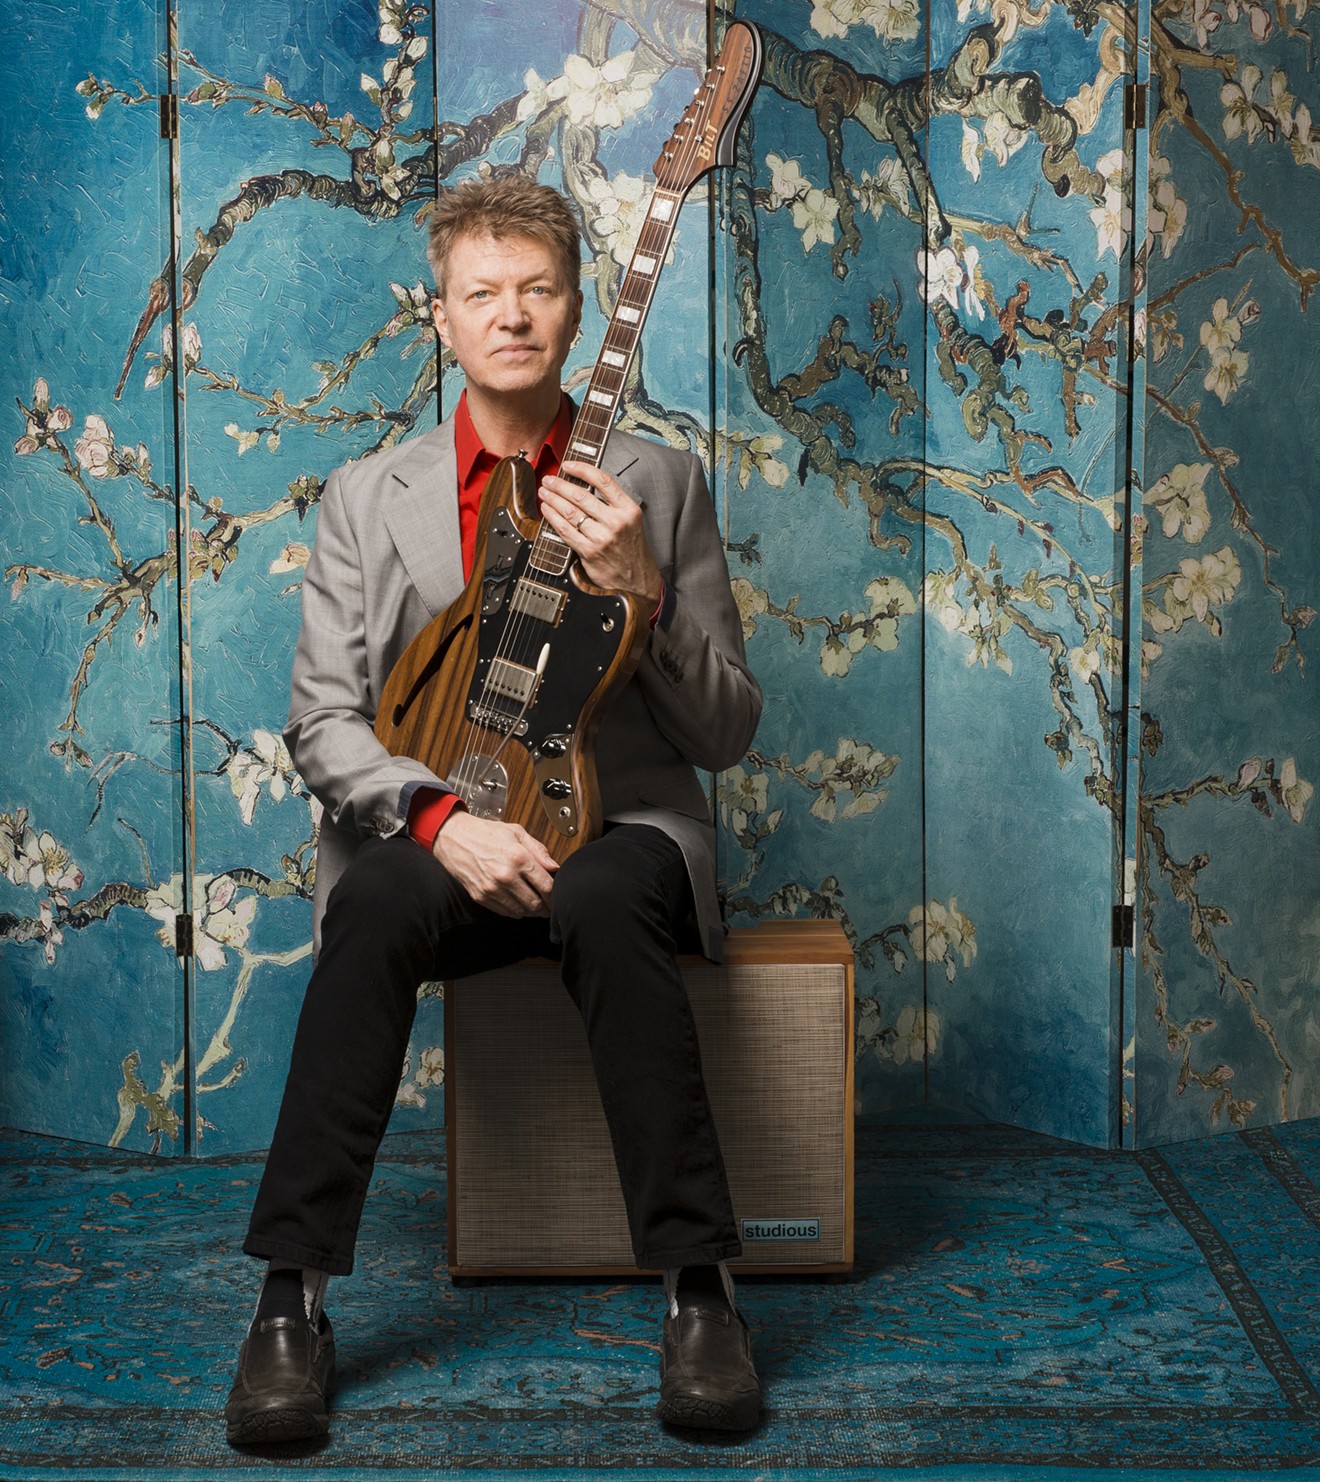 Nels Cline has been named as one of the world's best guitarists.